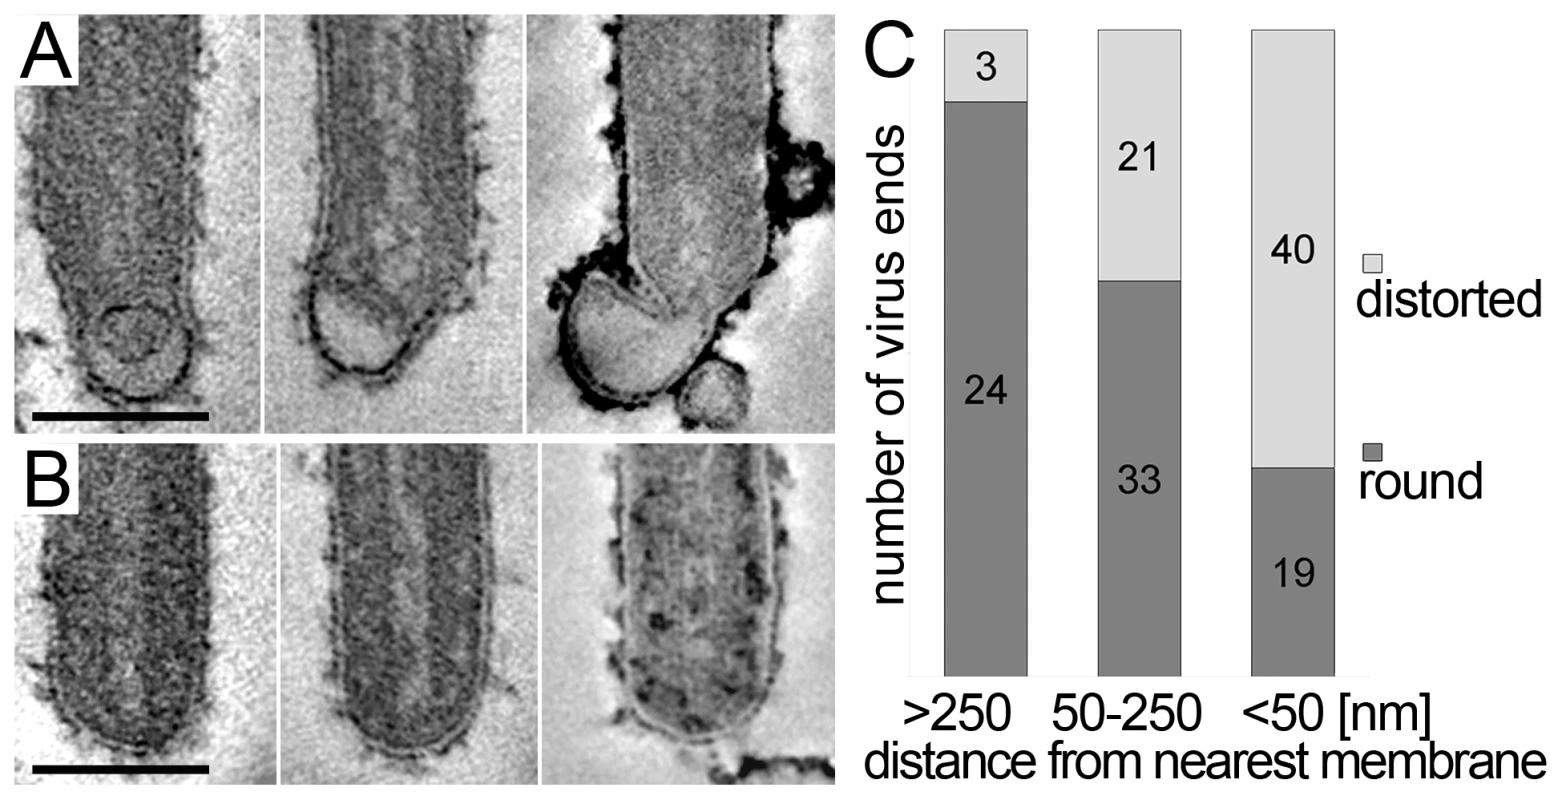 Membrane distortions are found at the rear end of filamentous MARV particles.